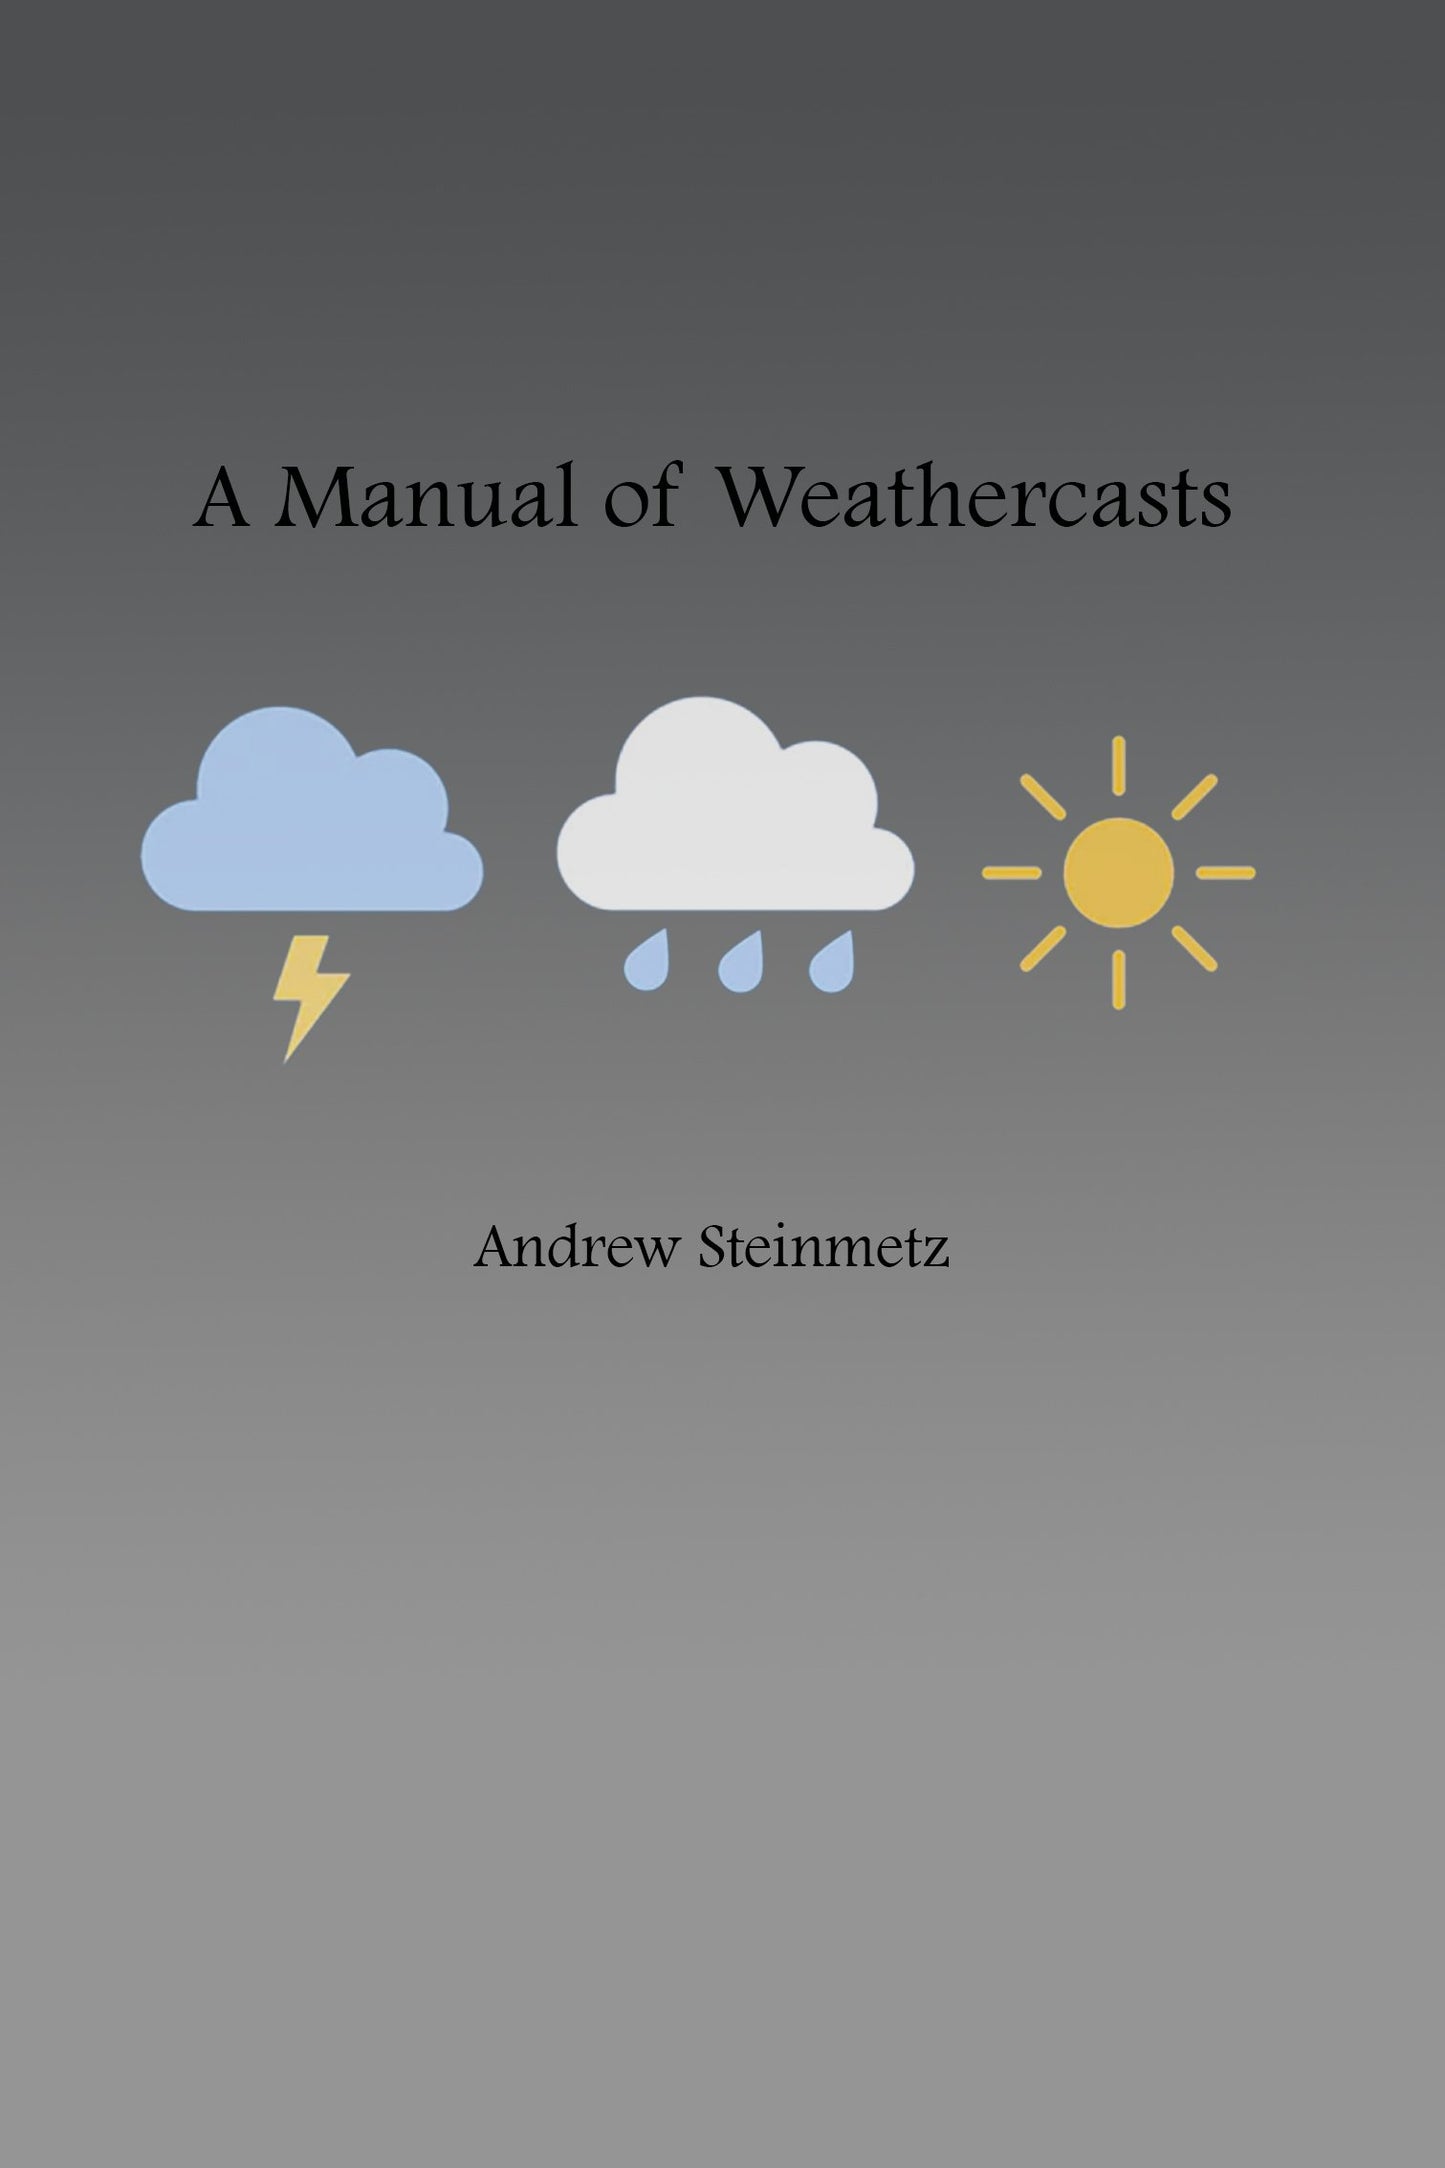 A Manual of Weathercasts